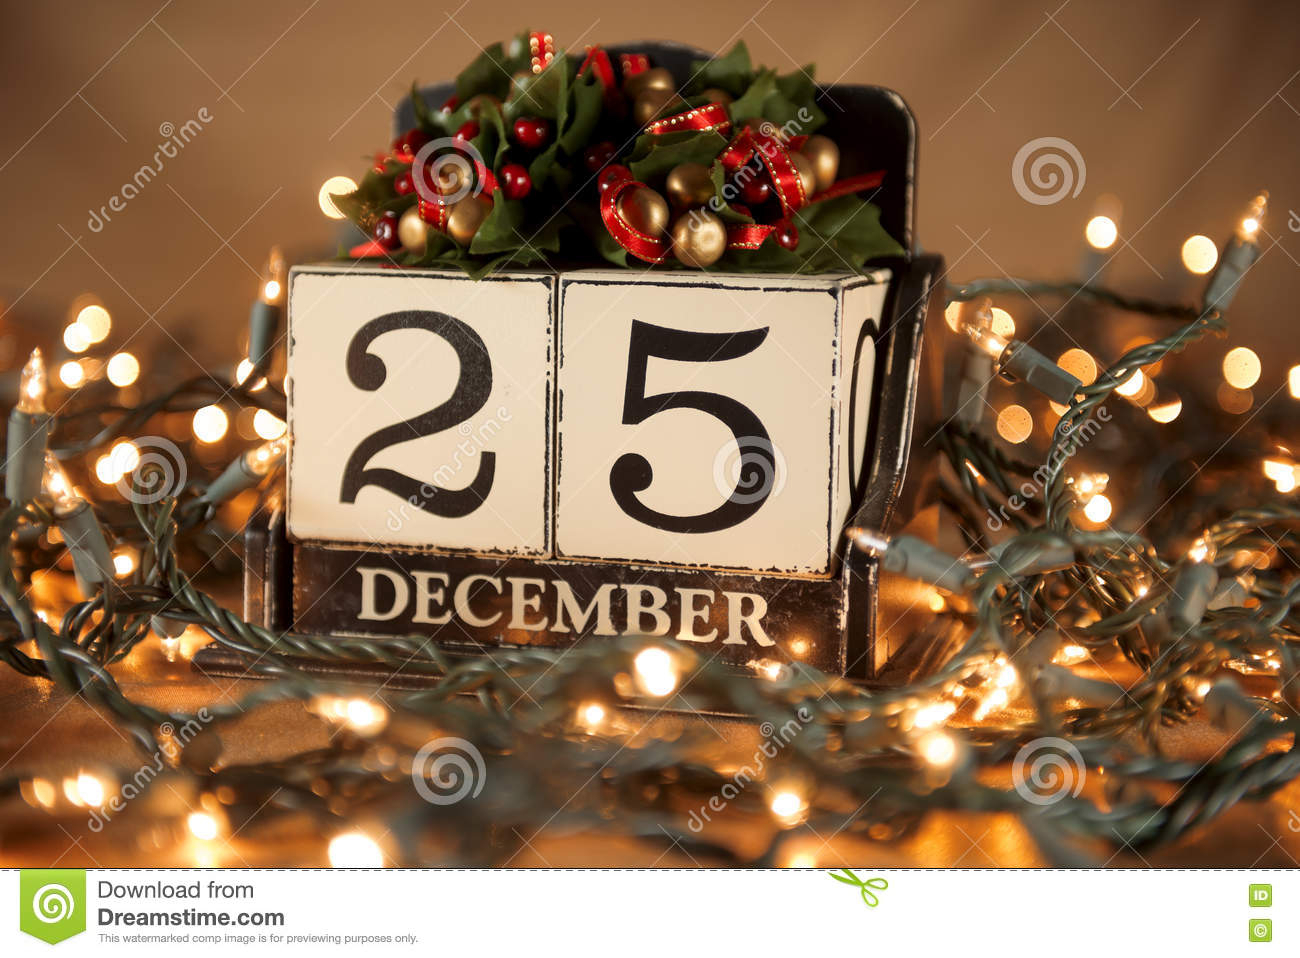 Christmas Calendar With 25Th December On Wooden Blocks